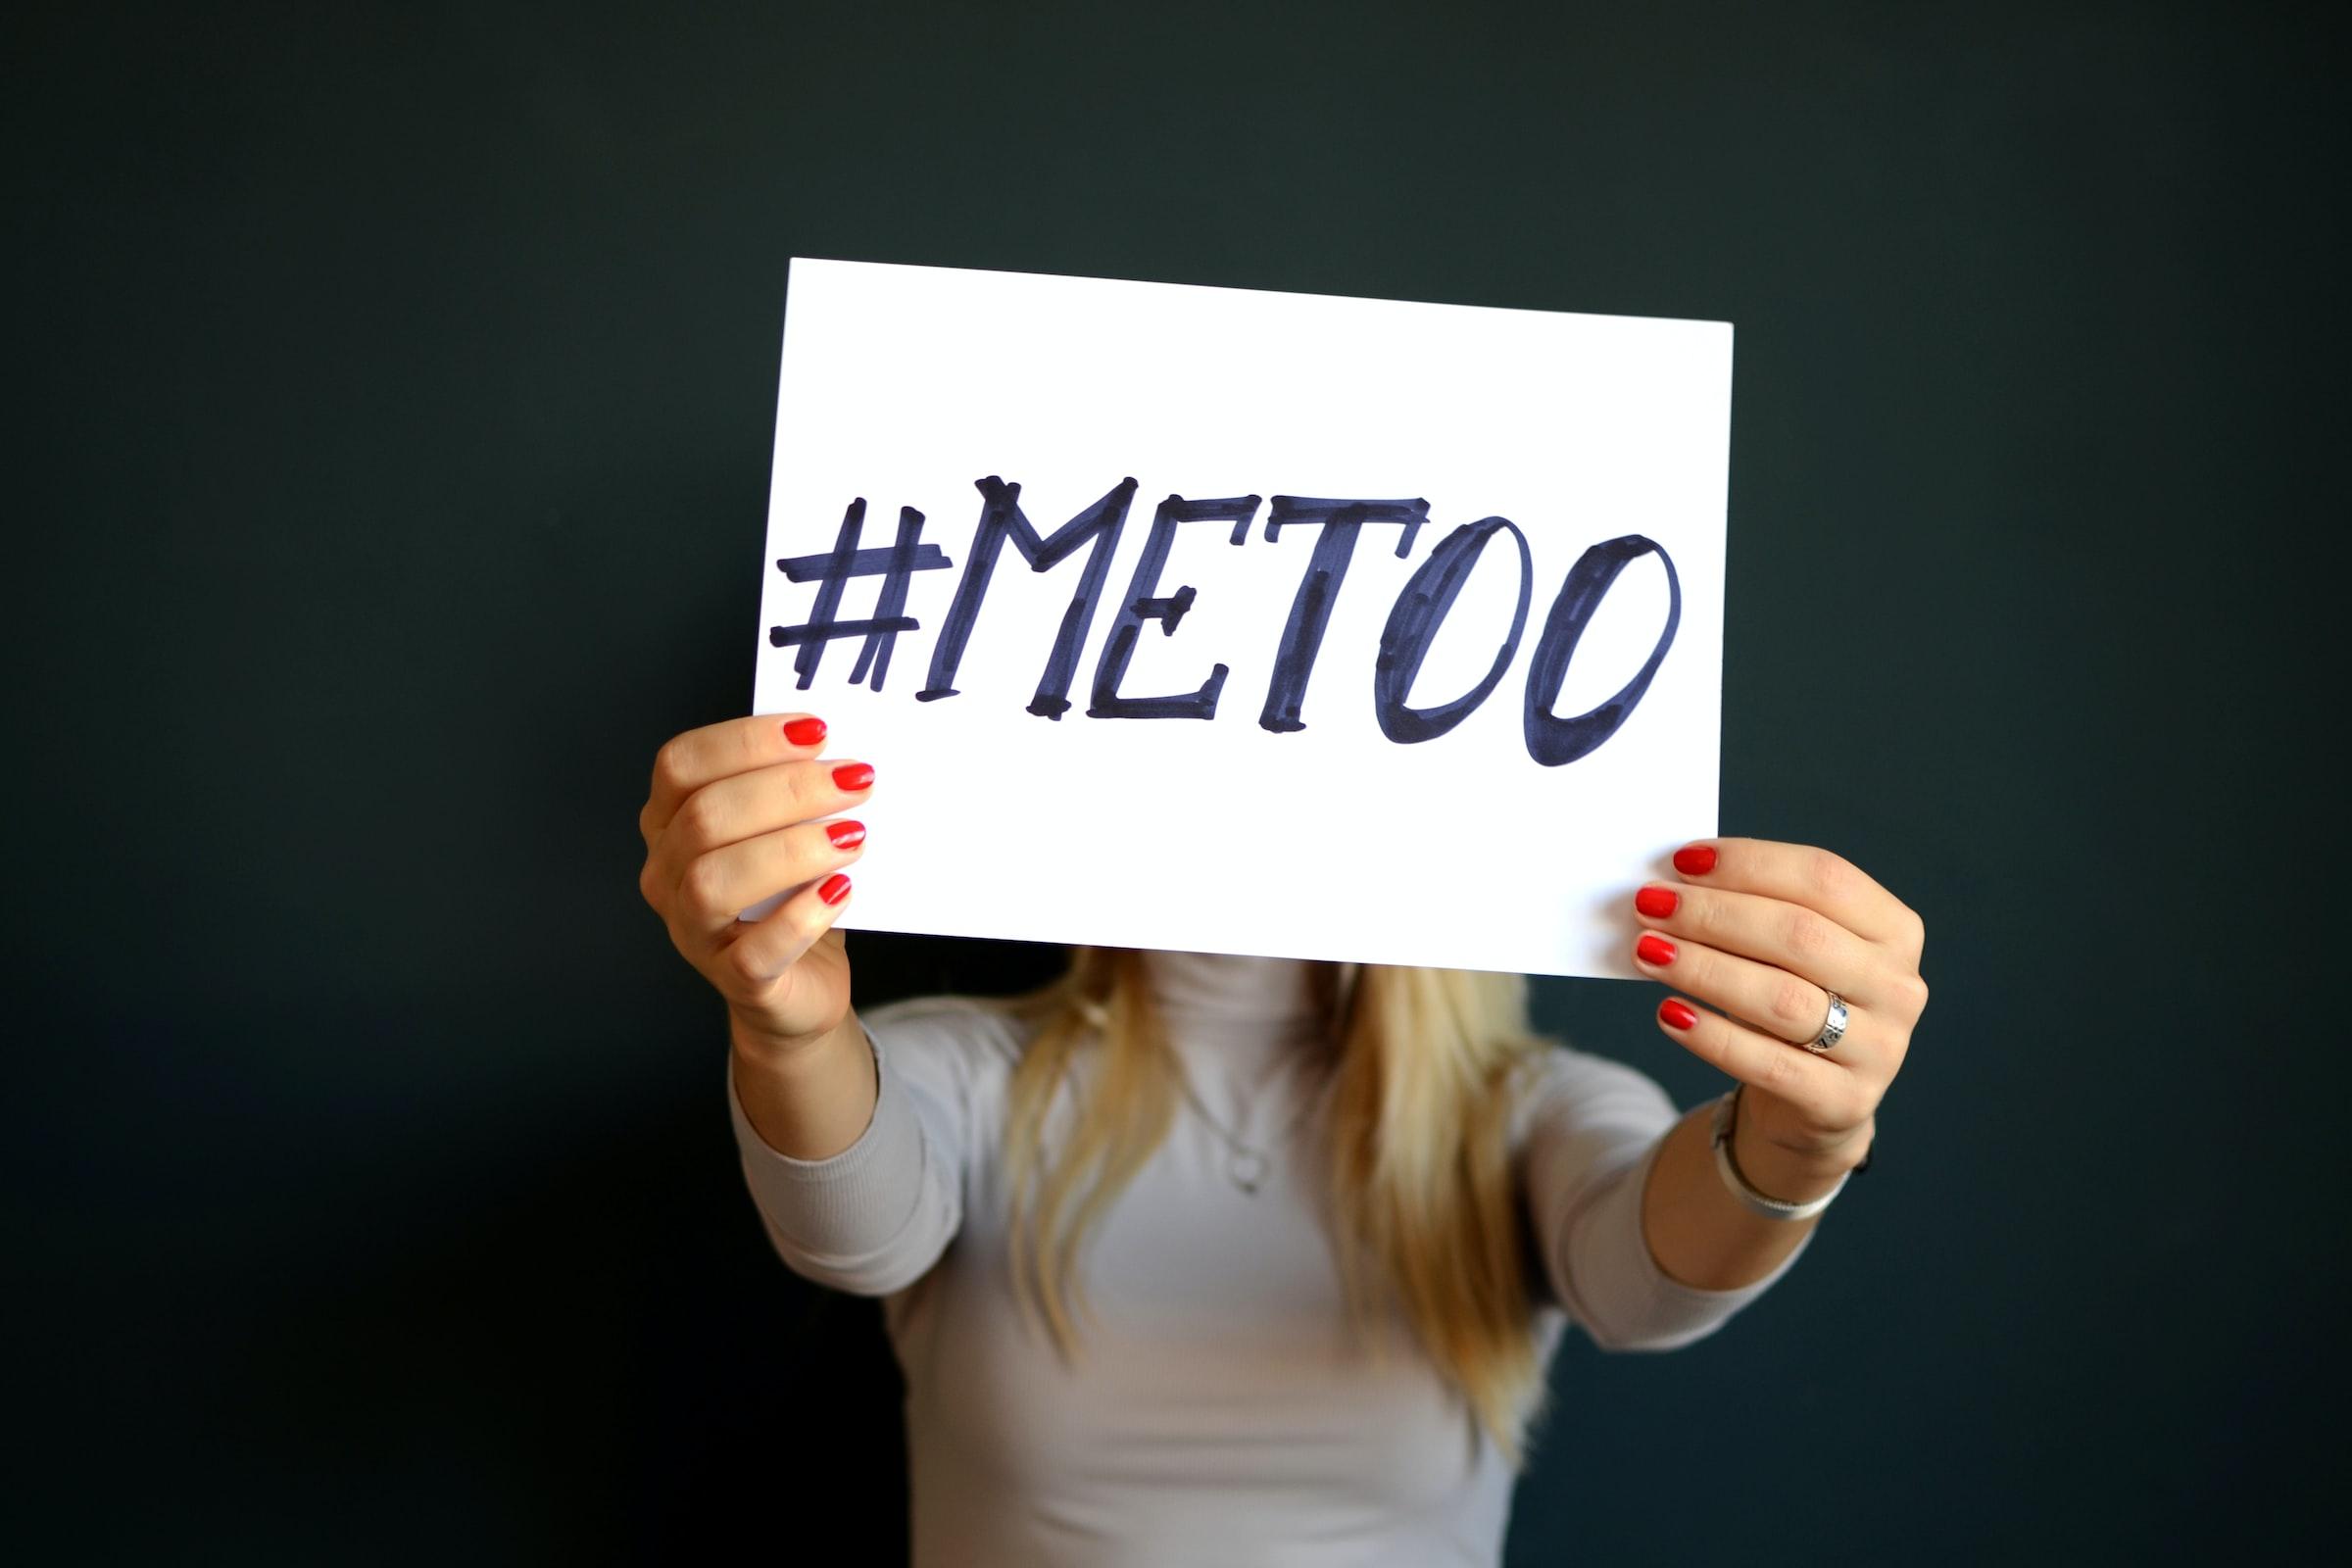 Image of a woman holding up a sign which says #metoo